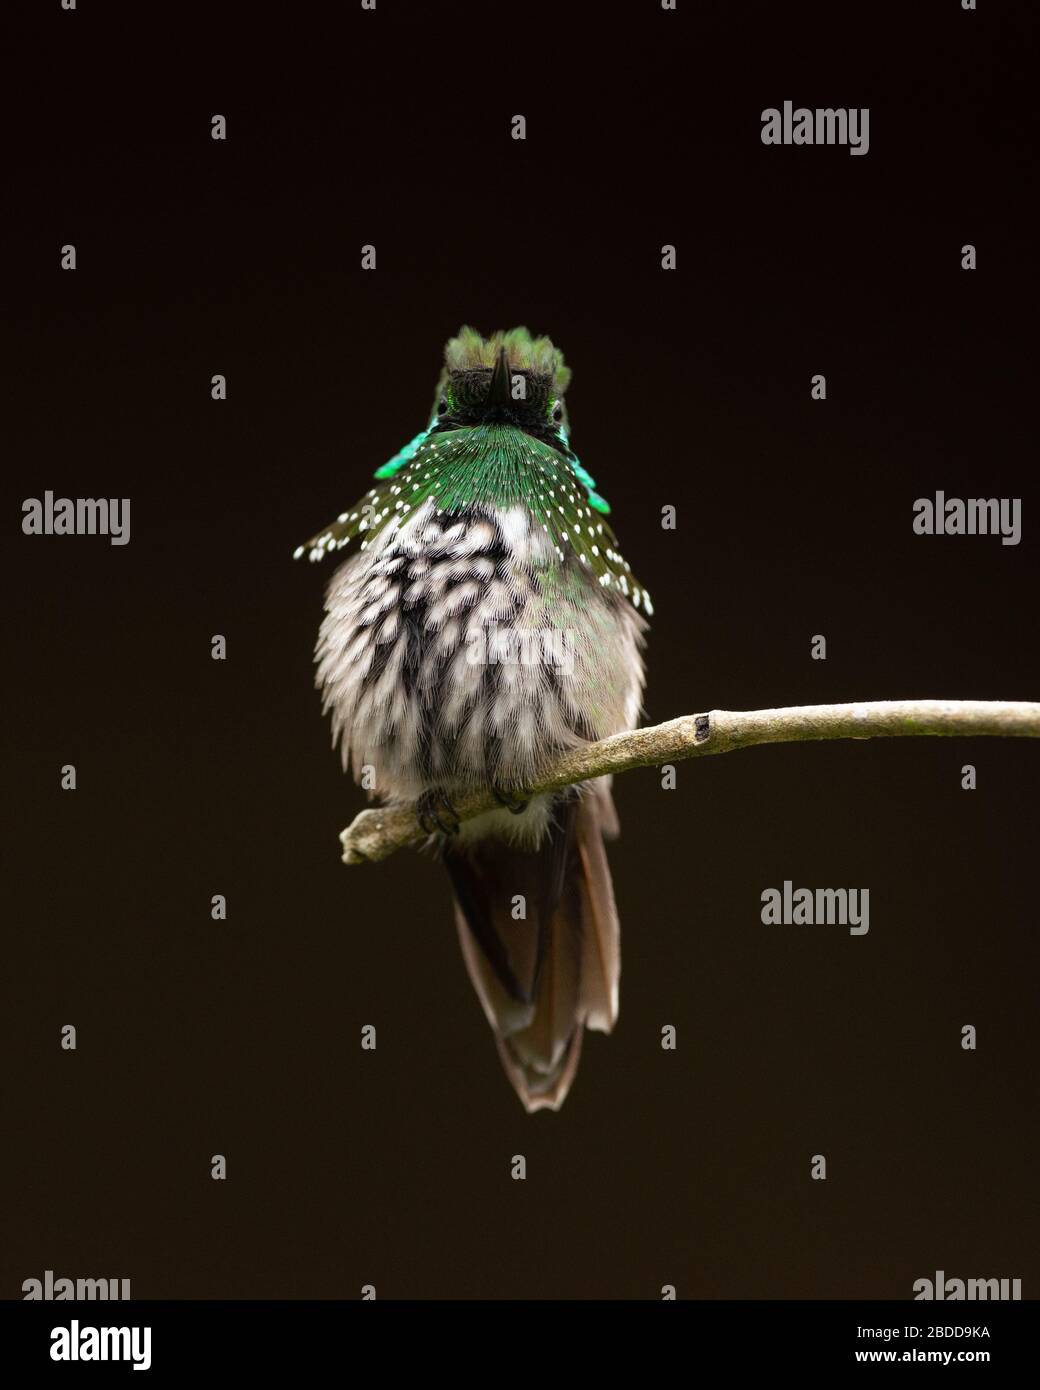 A male Festive Coquette (Lophornis chalybeus) from the Atlantic Rainforest of Brazil Stock Photo